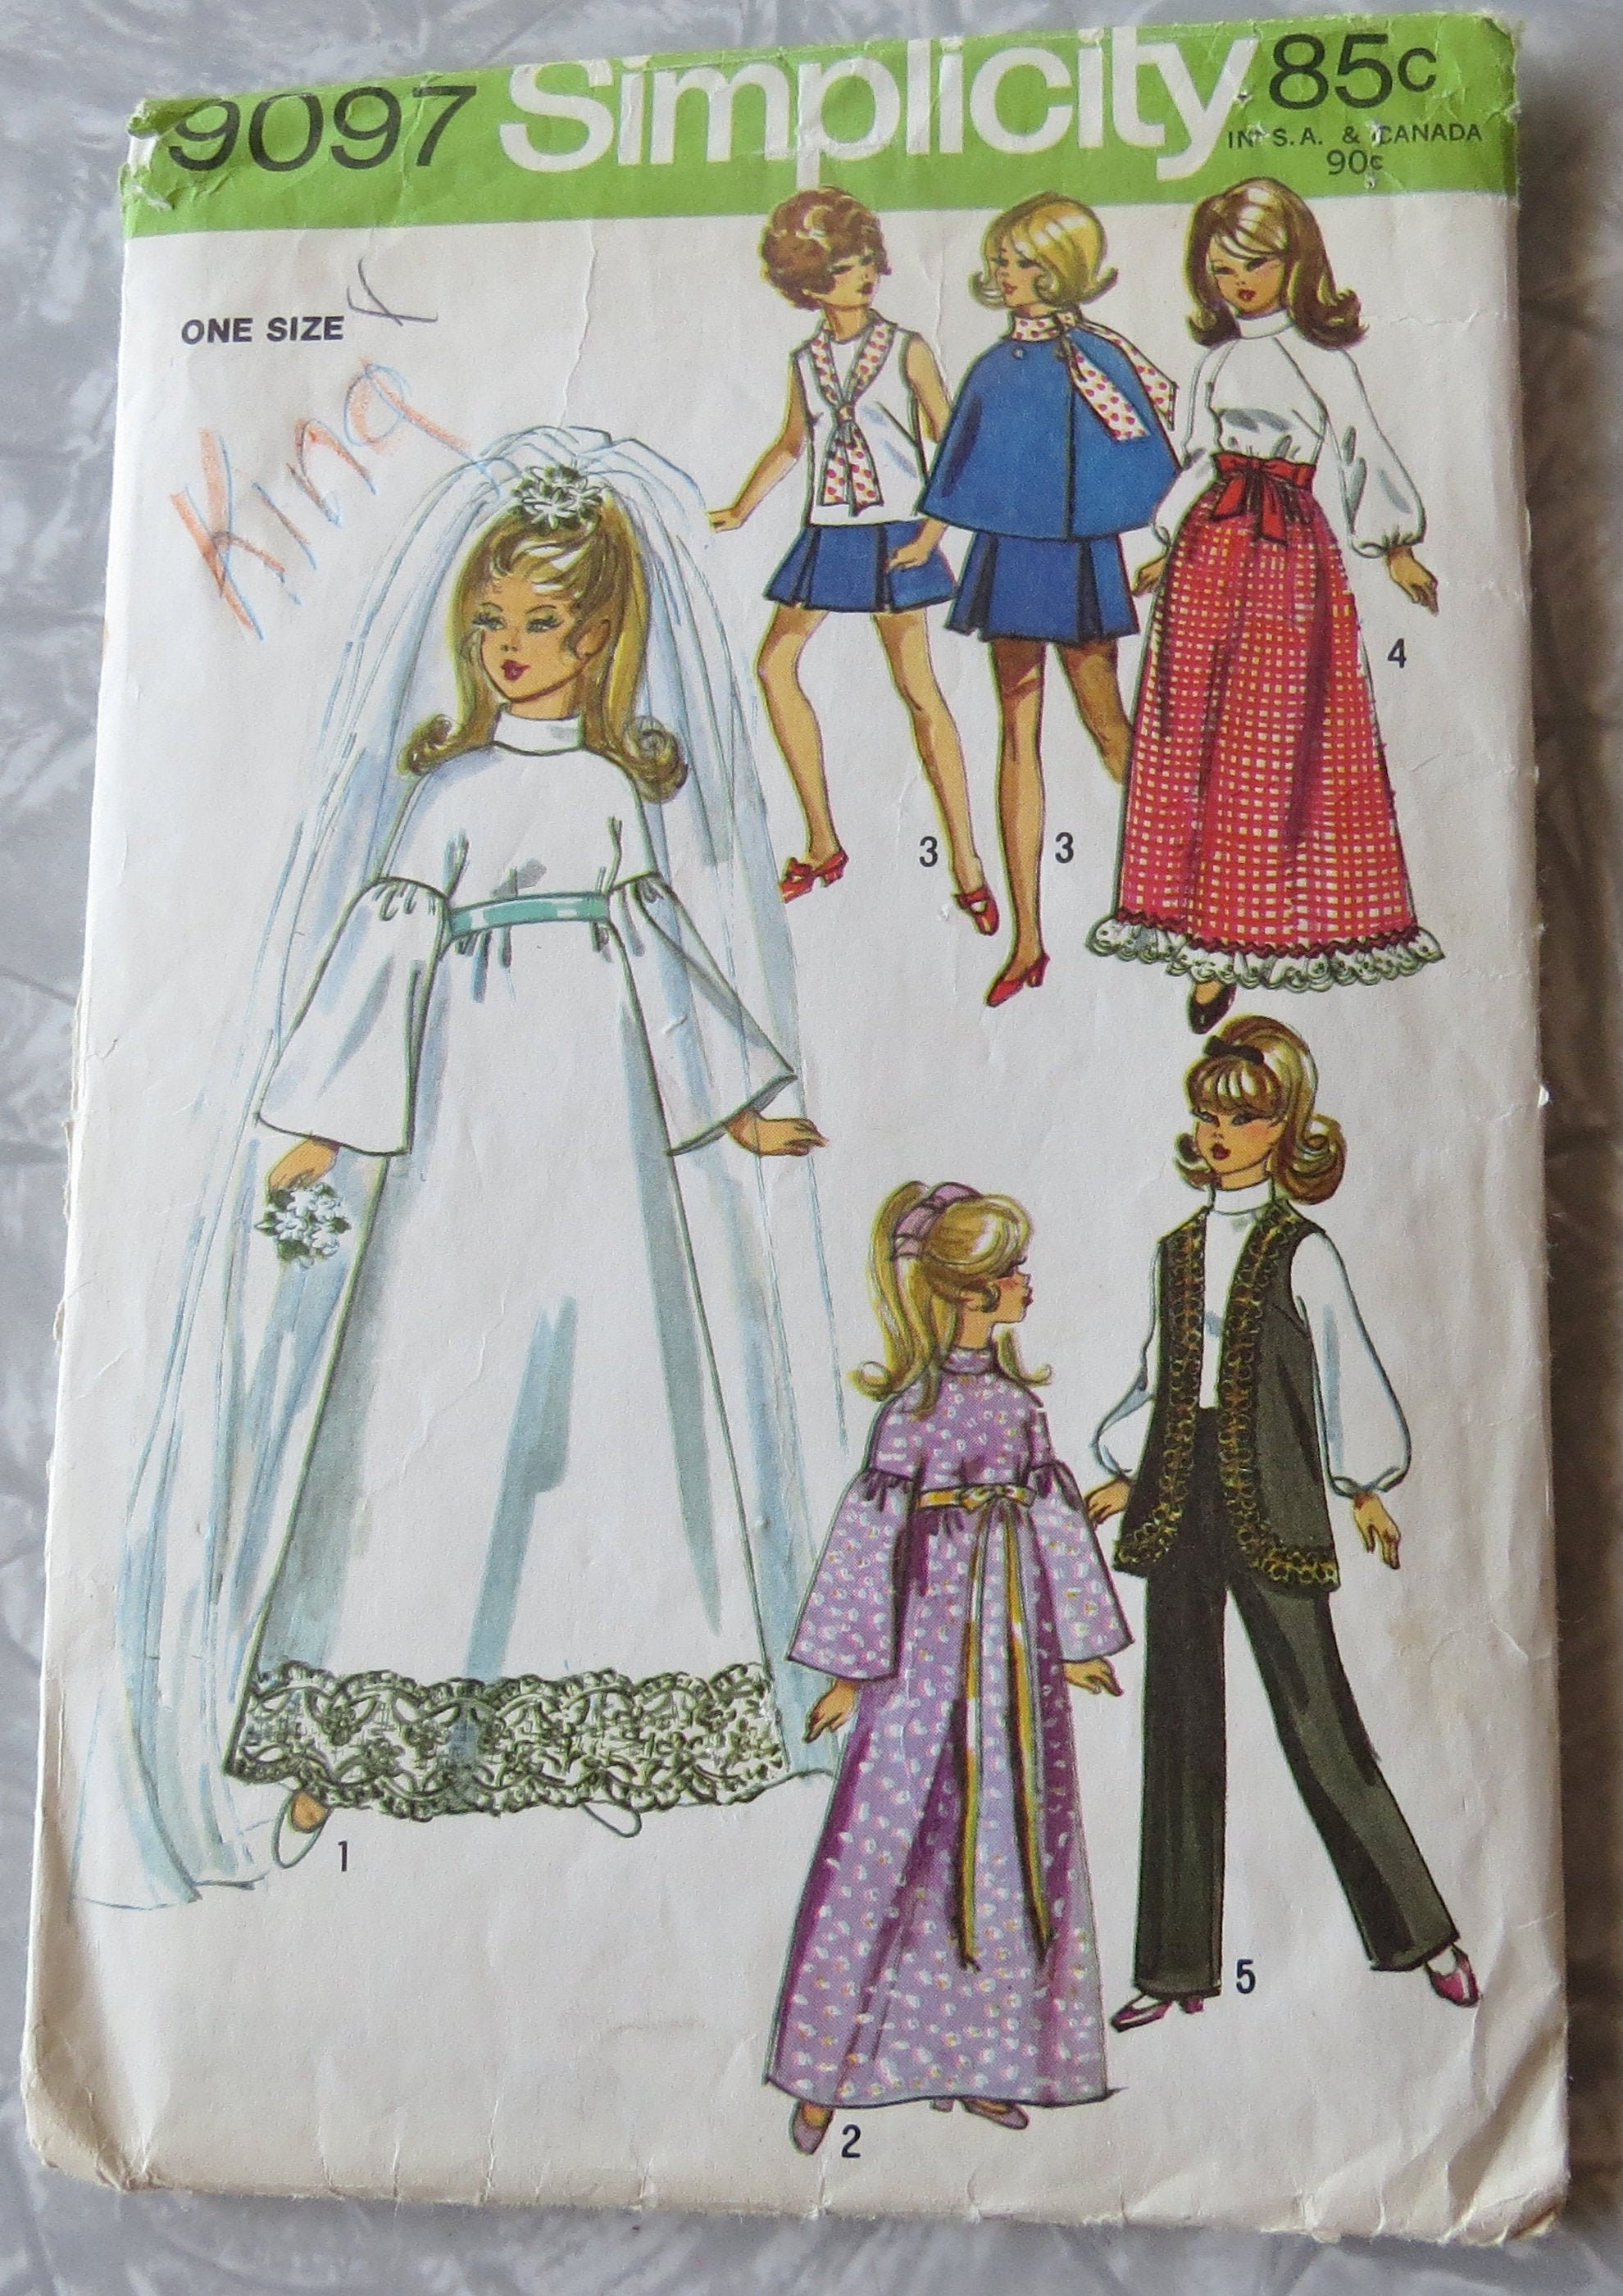 Simplicity 8281 Barbie doll clothes wardrobe vintage 1970/'s sewing pattern